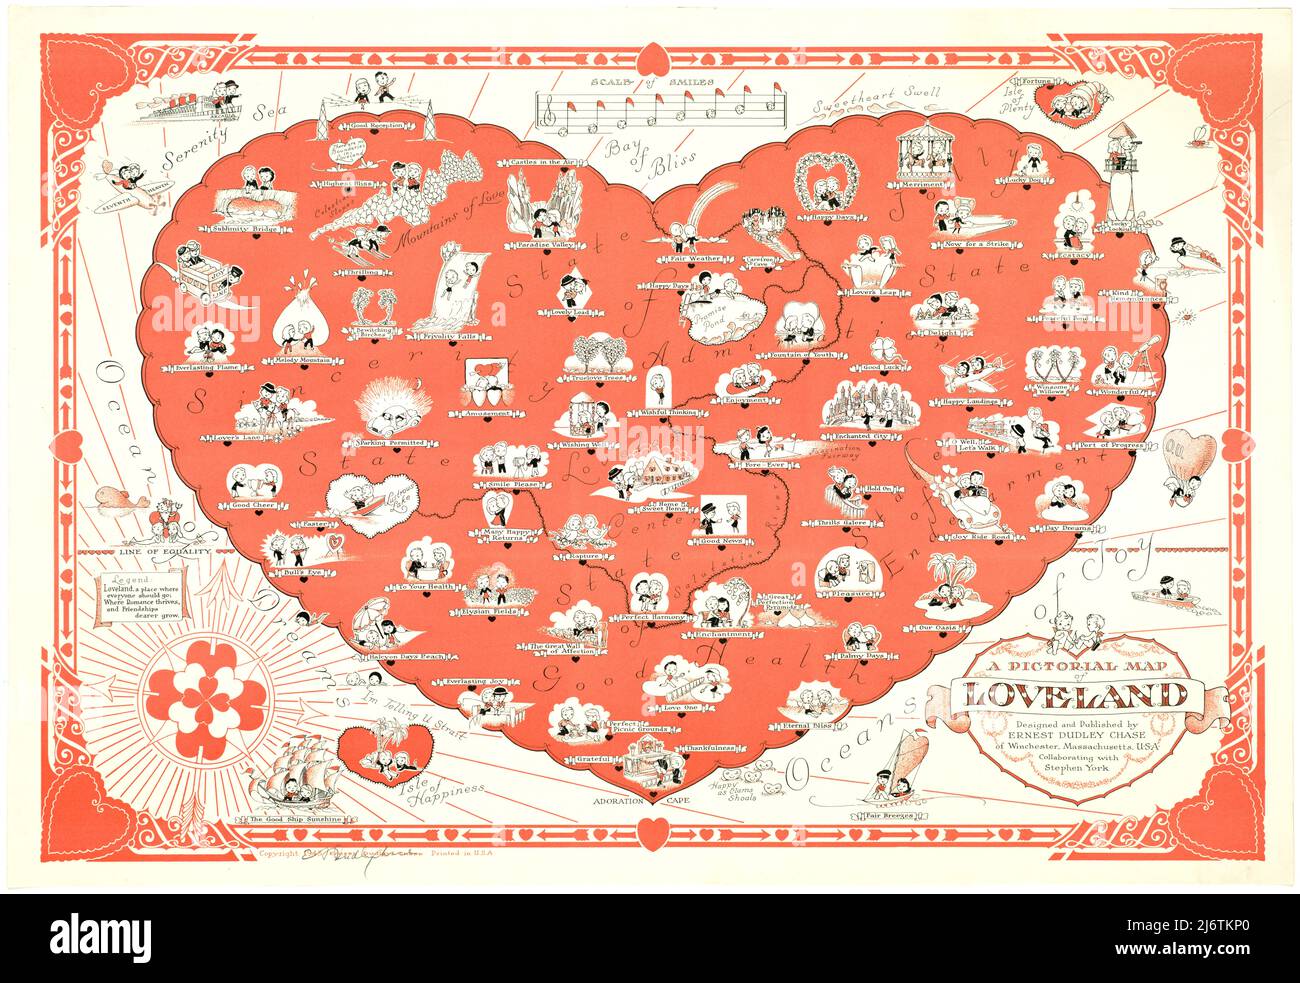 Ernest Dudley Chase - A Pictorial Map of Loveland - c1943 Stock Photo